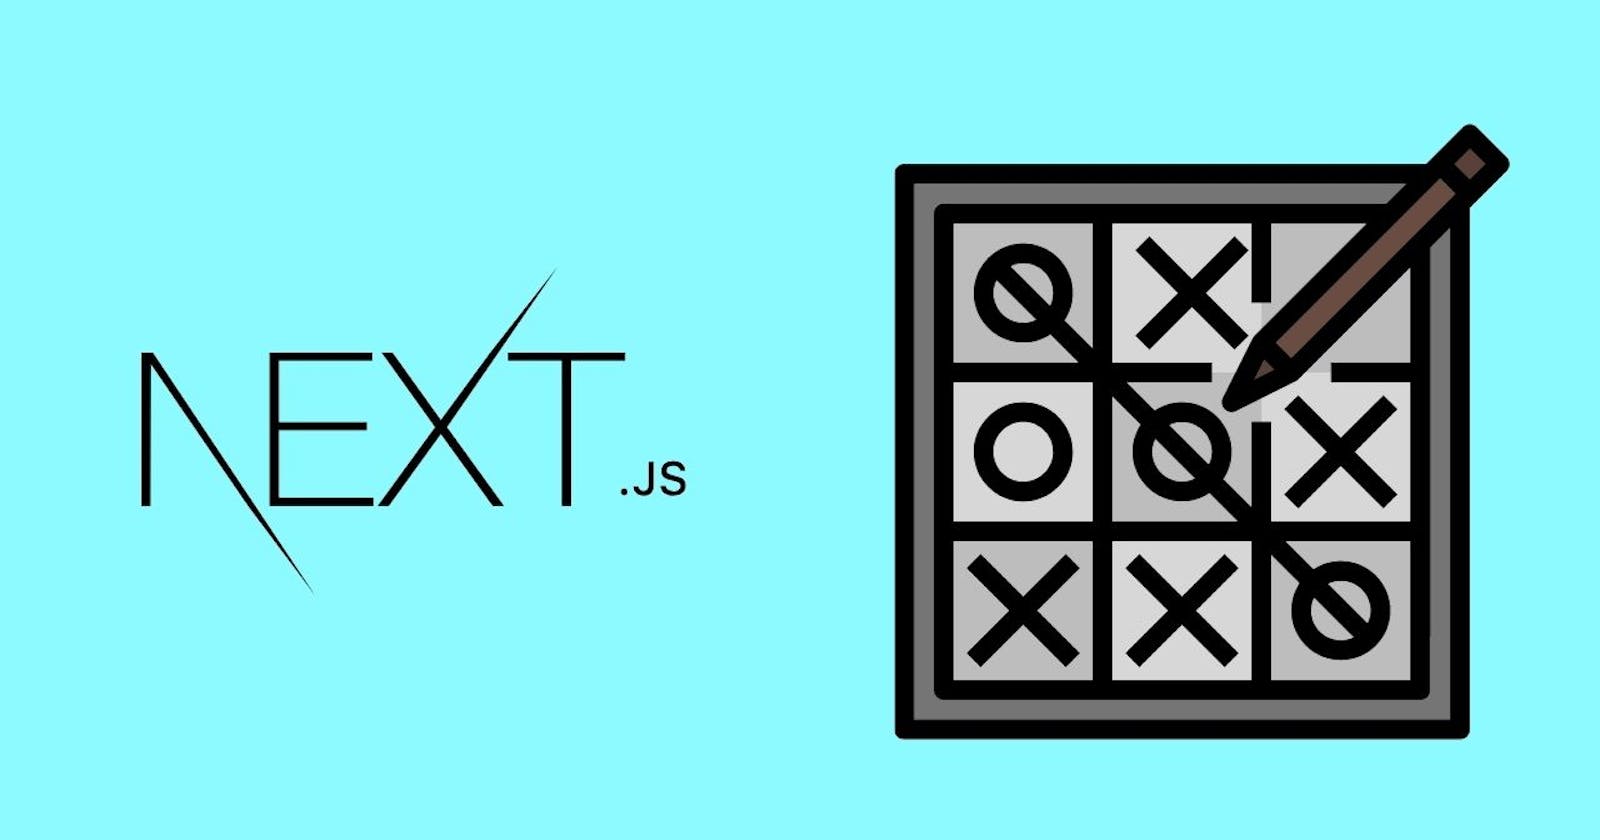 How to create a Tic Tac Toe Game using NEXT JS?